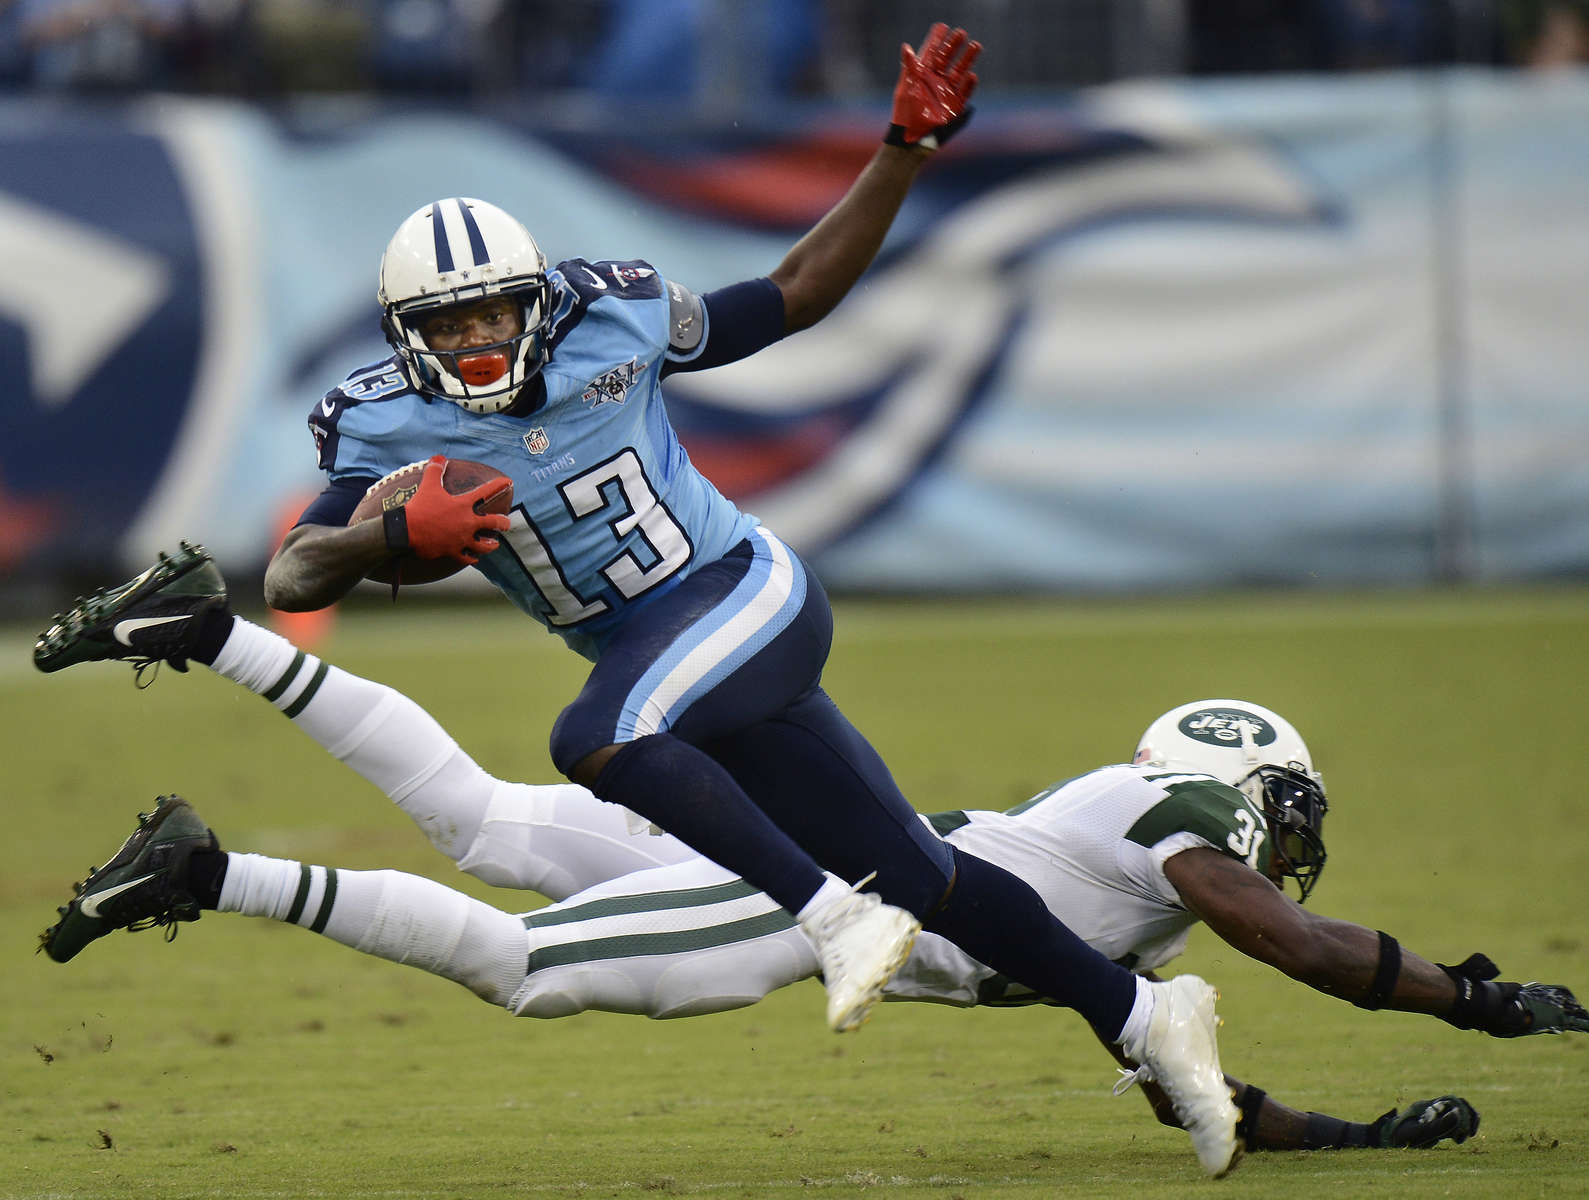 Tennessee Titans wide receiver Kendall Wright gets pastNew York Jets cornerback Antonio Cromartie in the third quarter of an NFL football game on Sept. 29, 2013, in Nashville, Tenn. (AP Photo/ Mark Zaleski)